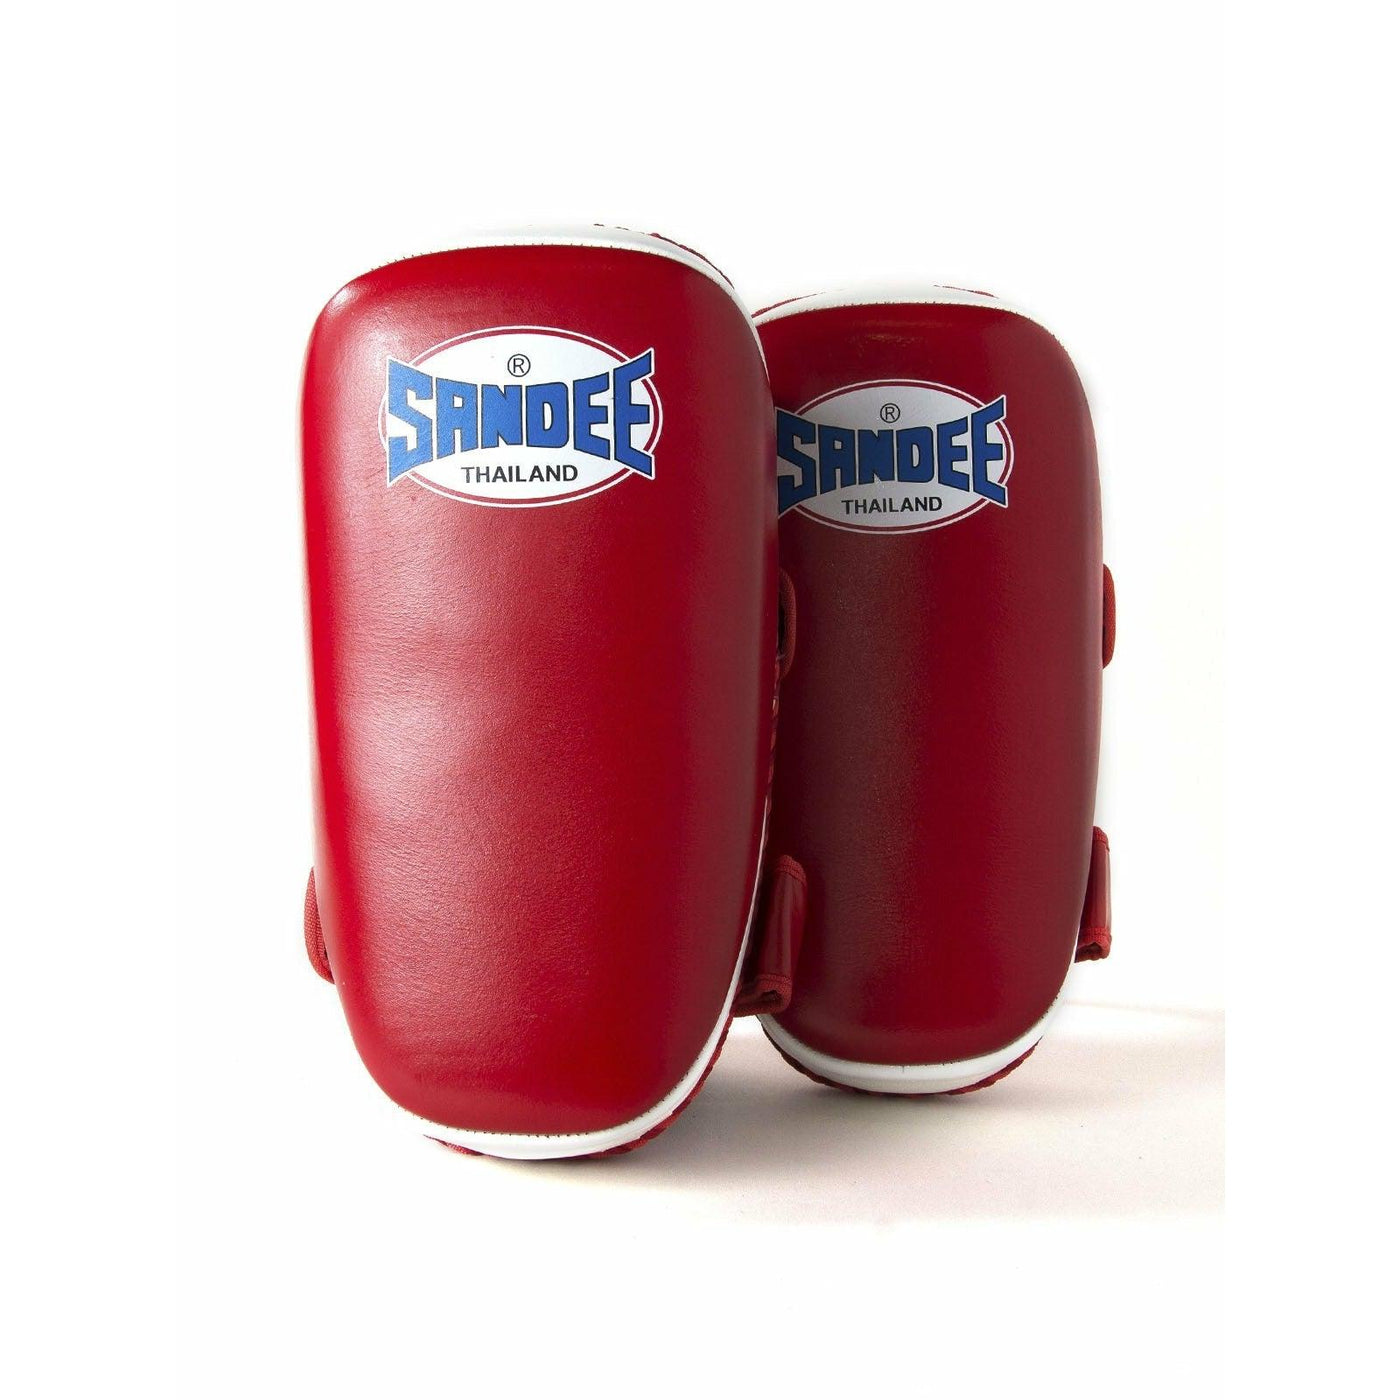 Sandee Curved Thai Pads - Red & White - Muay Thailand